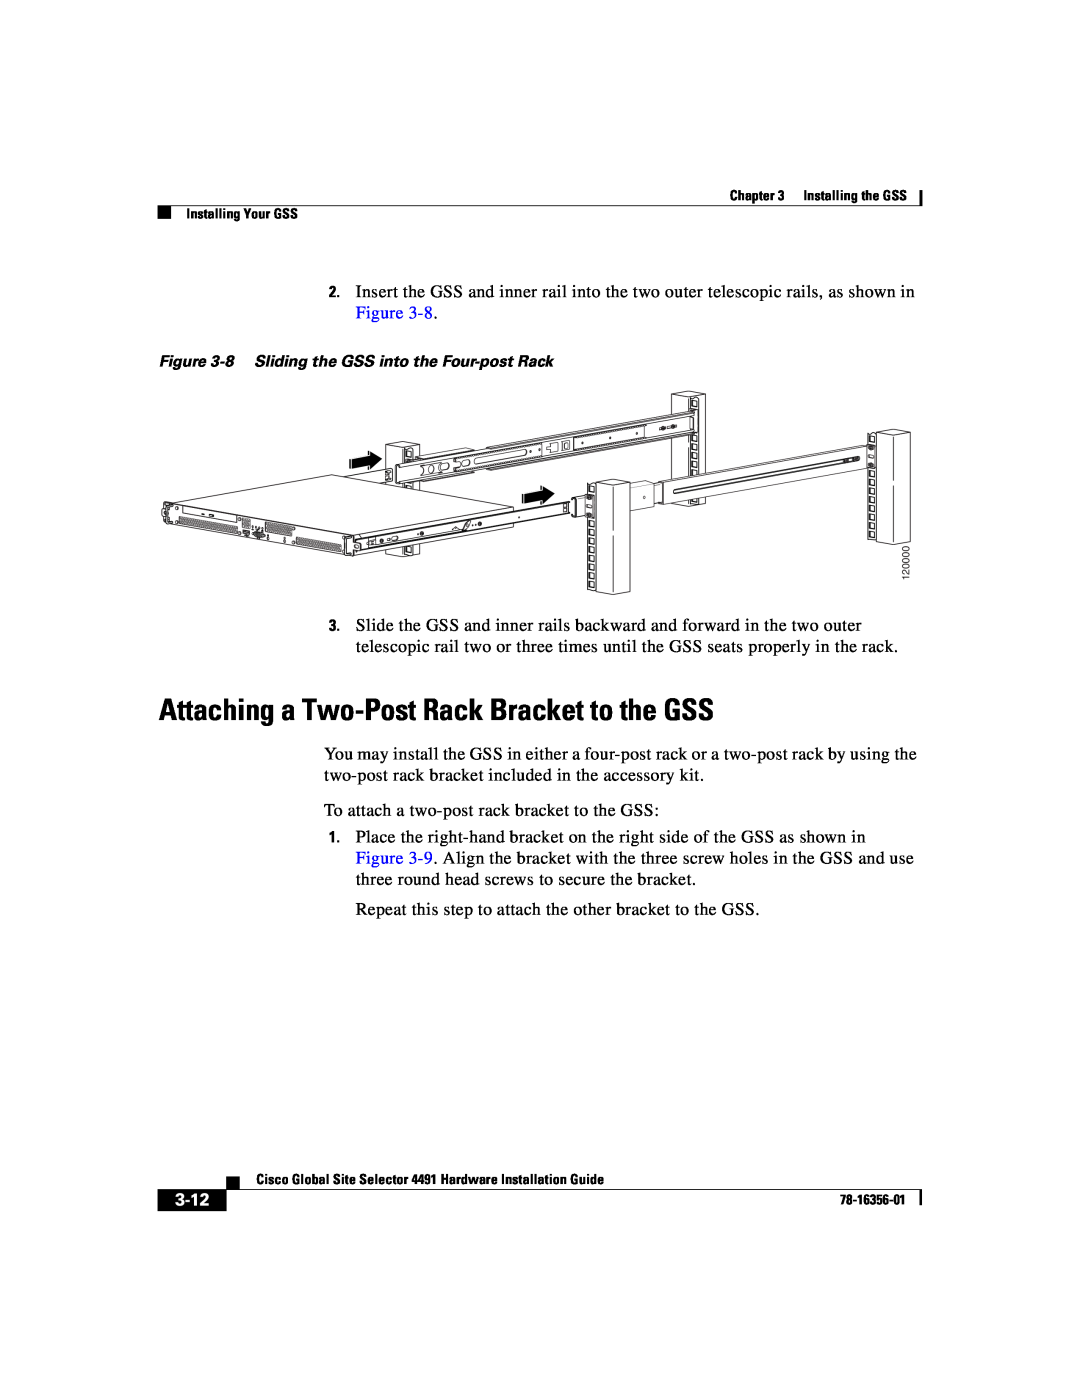 Cisco Systems 78-16356-01 manual Attaching a Two-Post Rack Bracket to the GSS, 3-12 